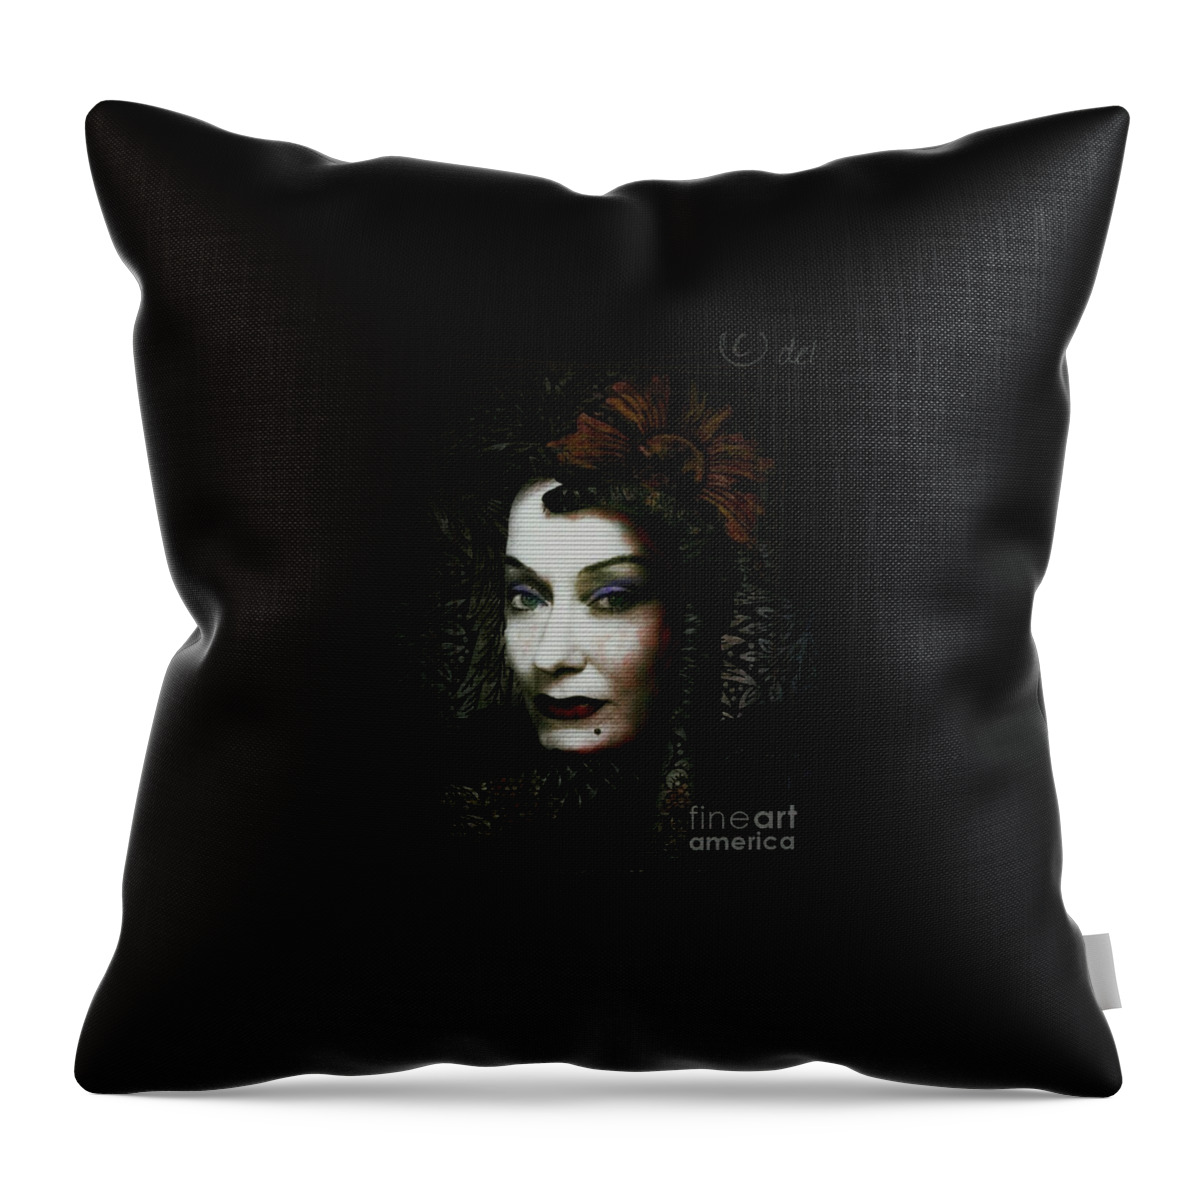 Black Throw Pillow featuring the digital art Sugar Buster by Delight Worthyn